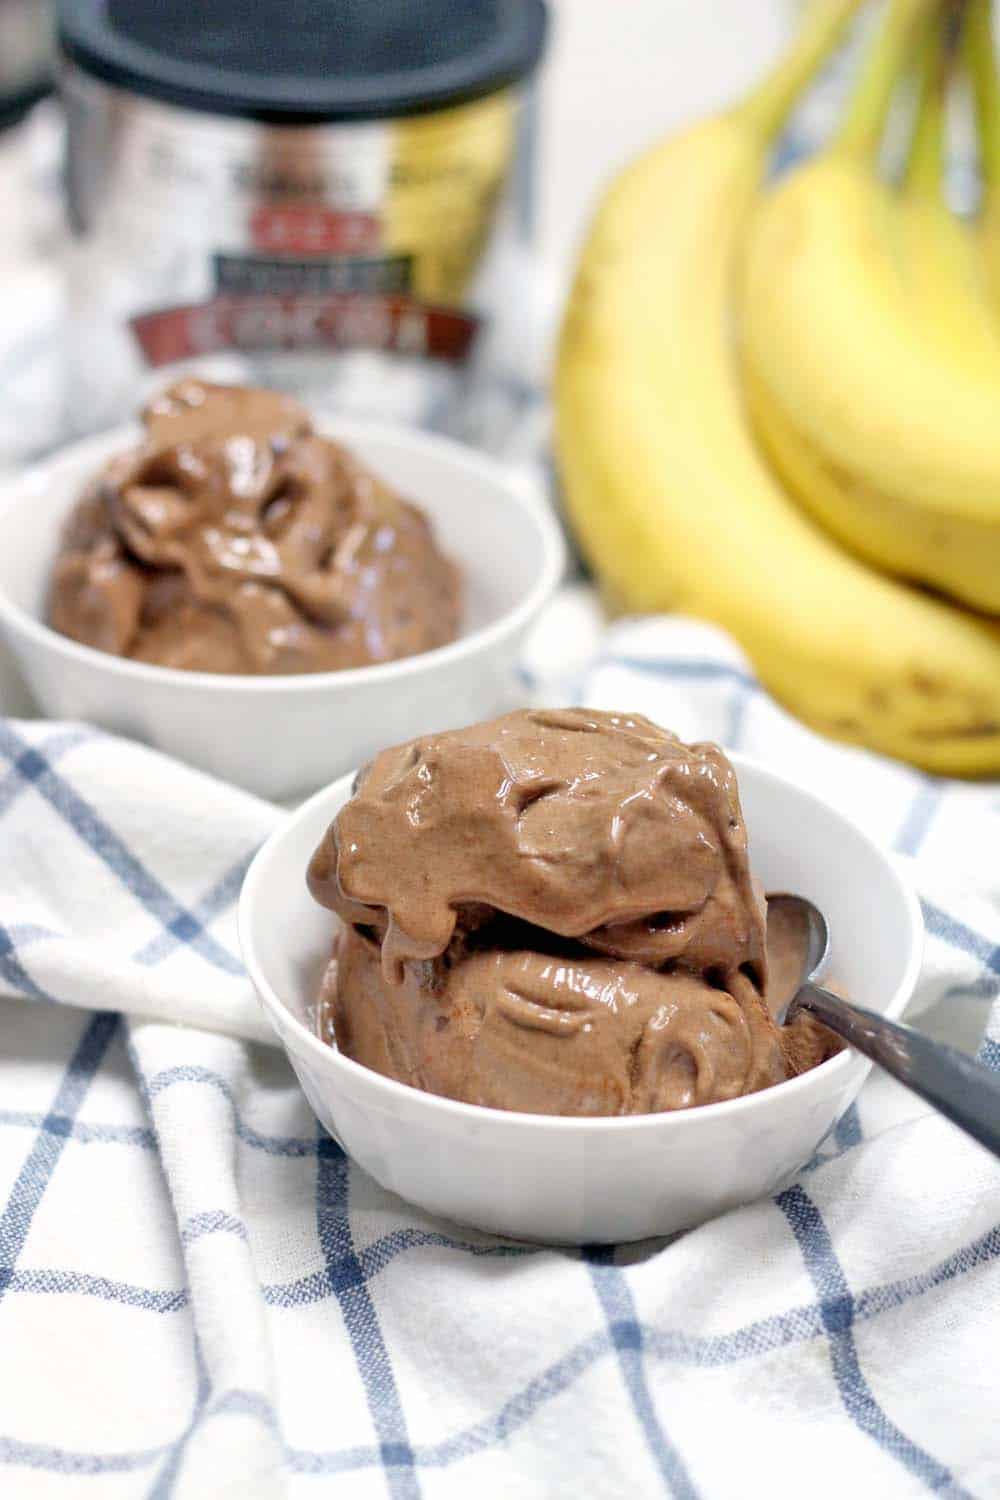 This vegan chocolate banana ice cream is made of only TWO ingredients and is an awesome, healthy substitute for traditional ice cream!